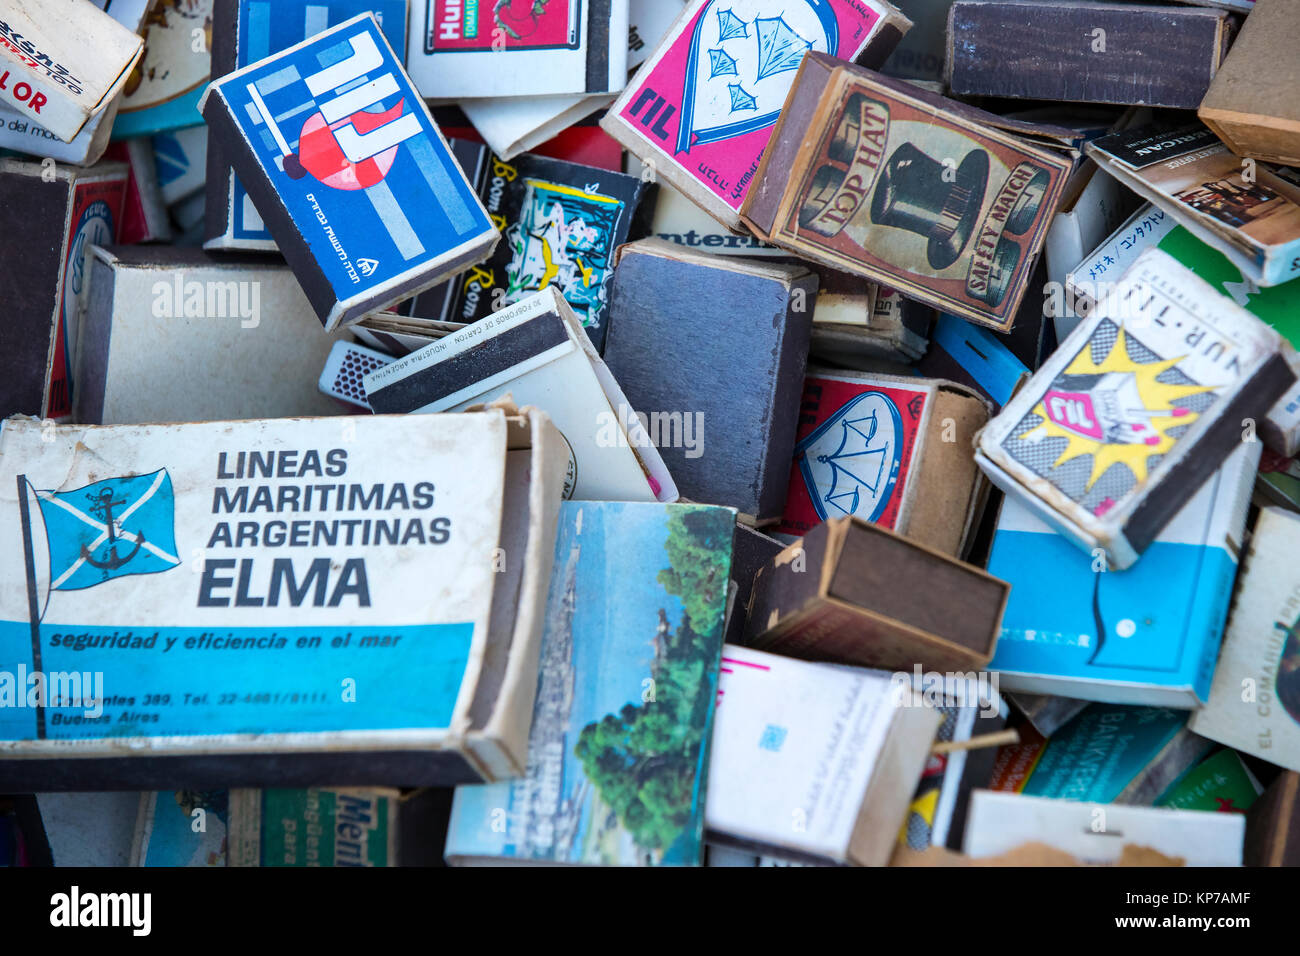 TEL AVIV-JAFFA, ISRAEL - 24 NOVEMBER 2017:Collection of matchboxes on the shelves of the antique market Stock Photo